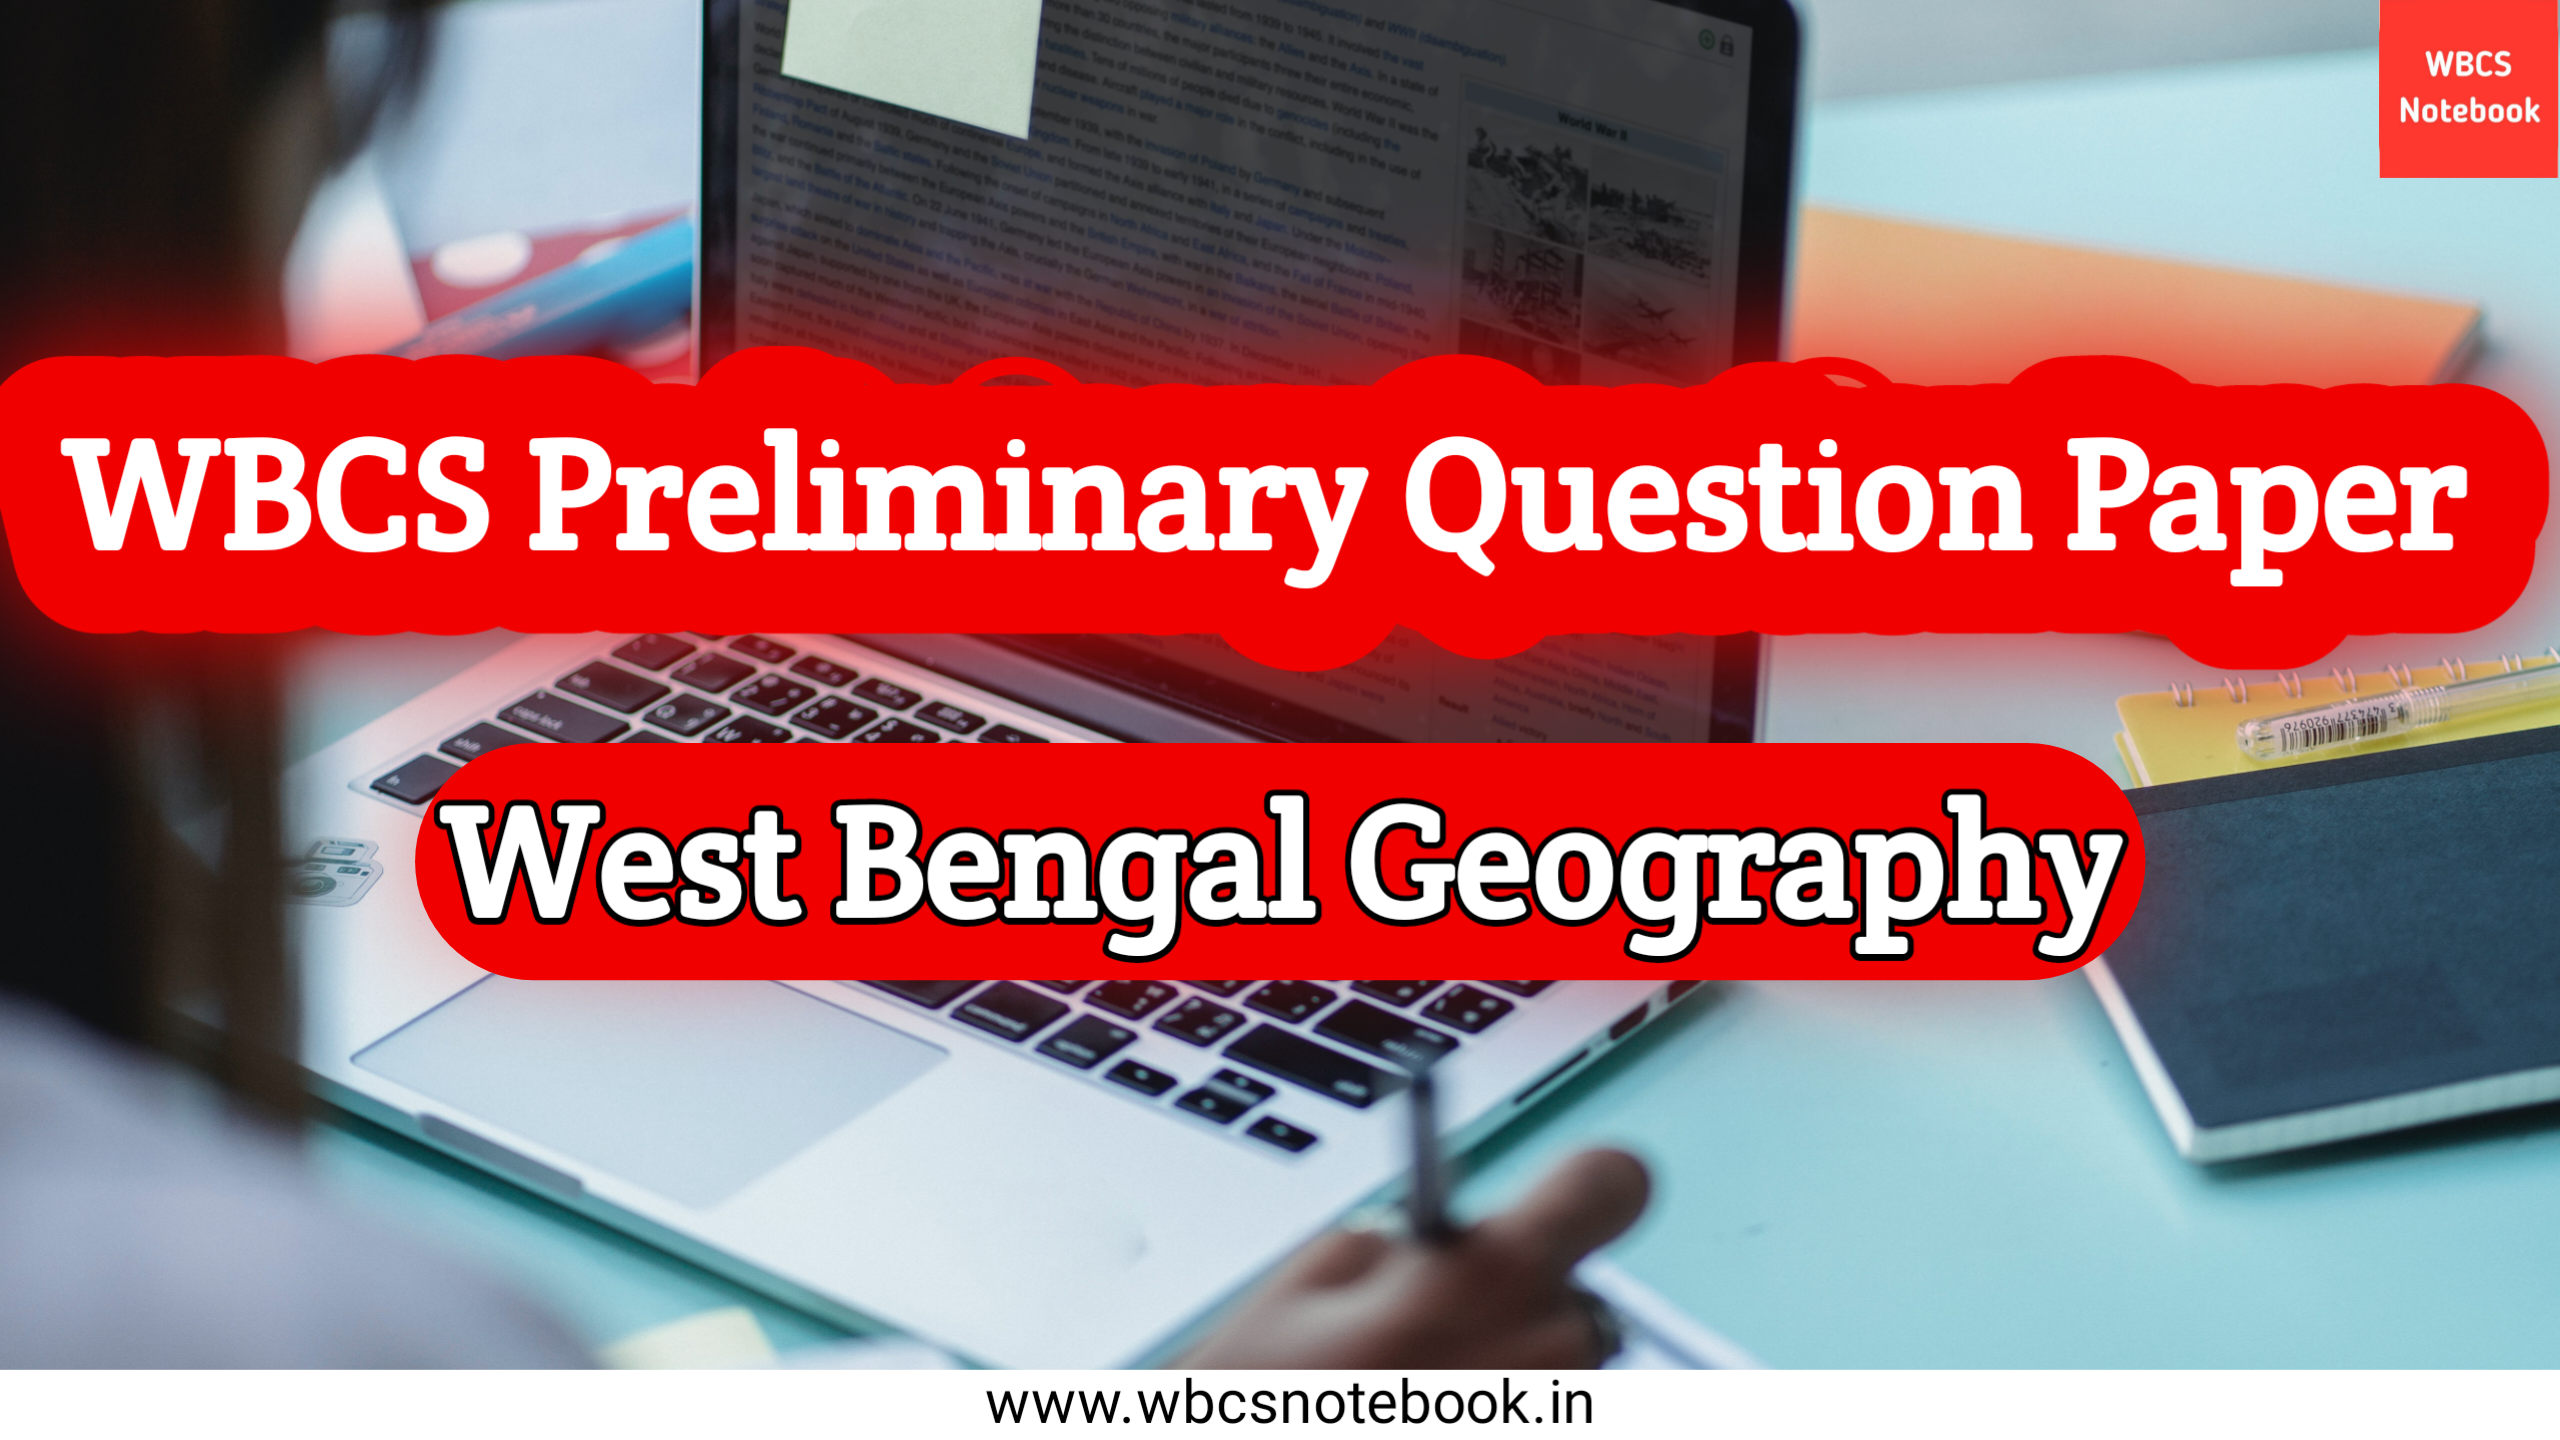 West Bengal Geography – WBCS Preliminary Question Paper